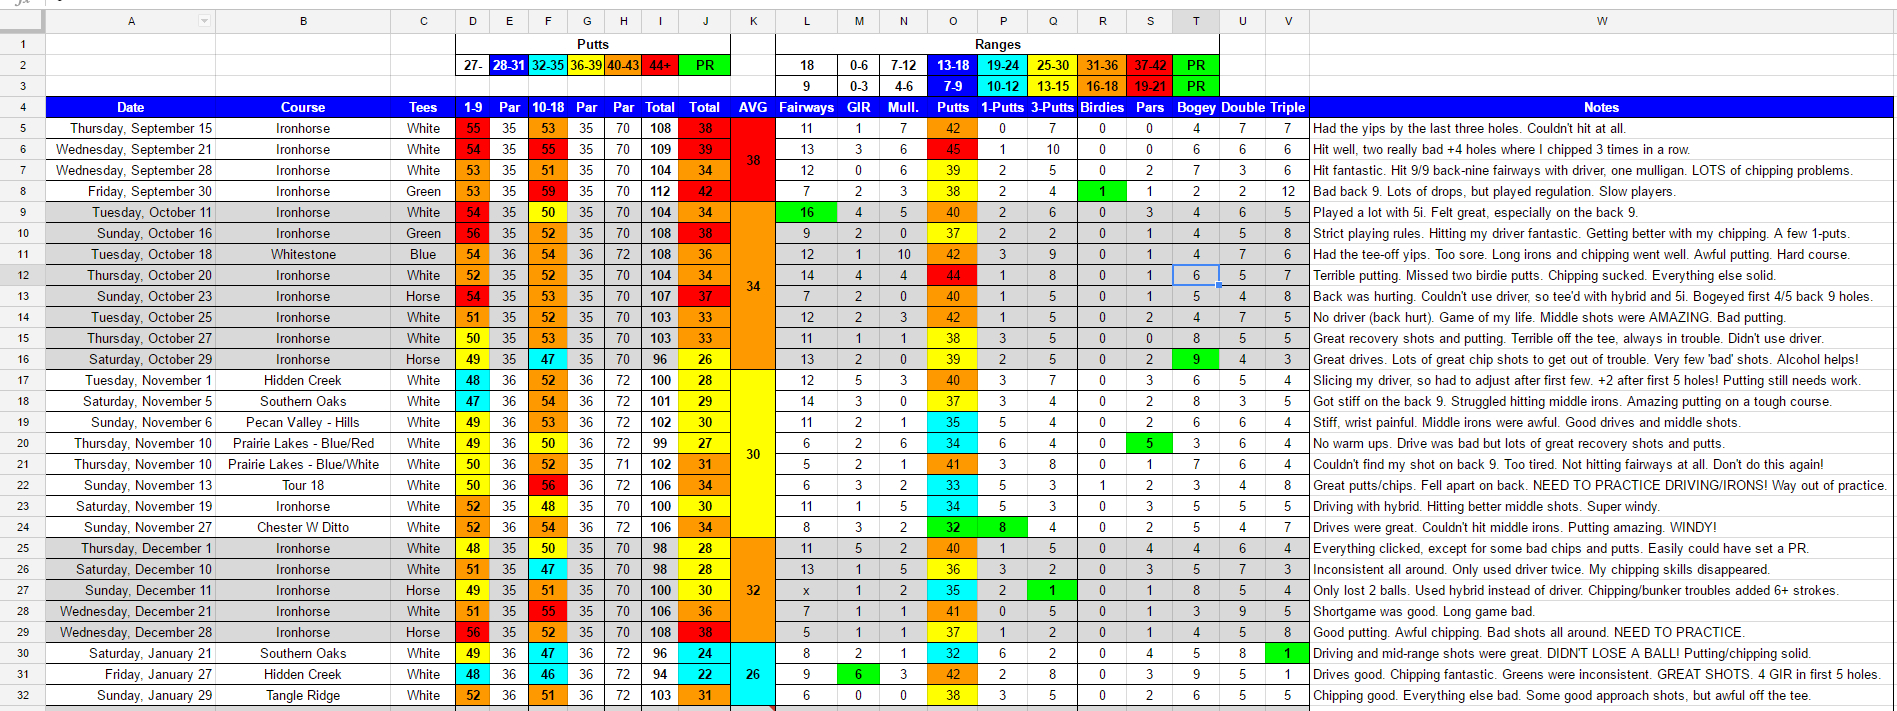 Strokes Gained Spreadsheet pertaining to Do Any Of You Have Your Own Spreadsheets You Use To Track Personal